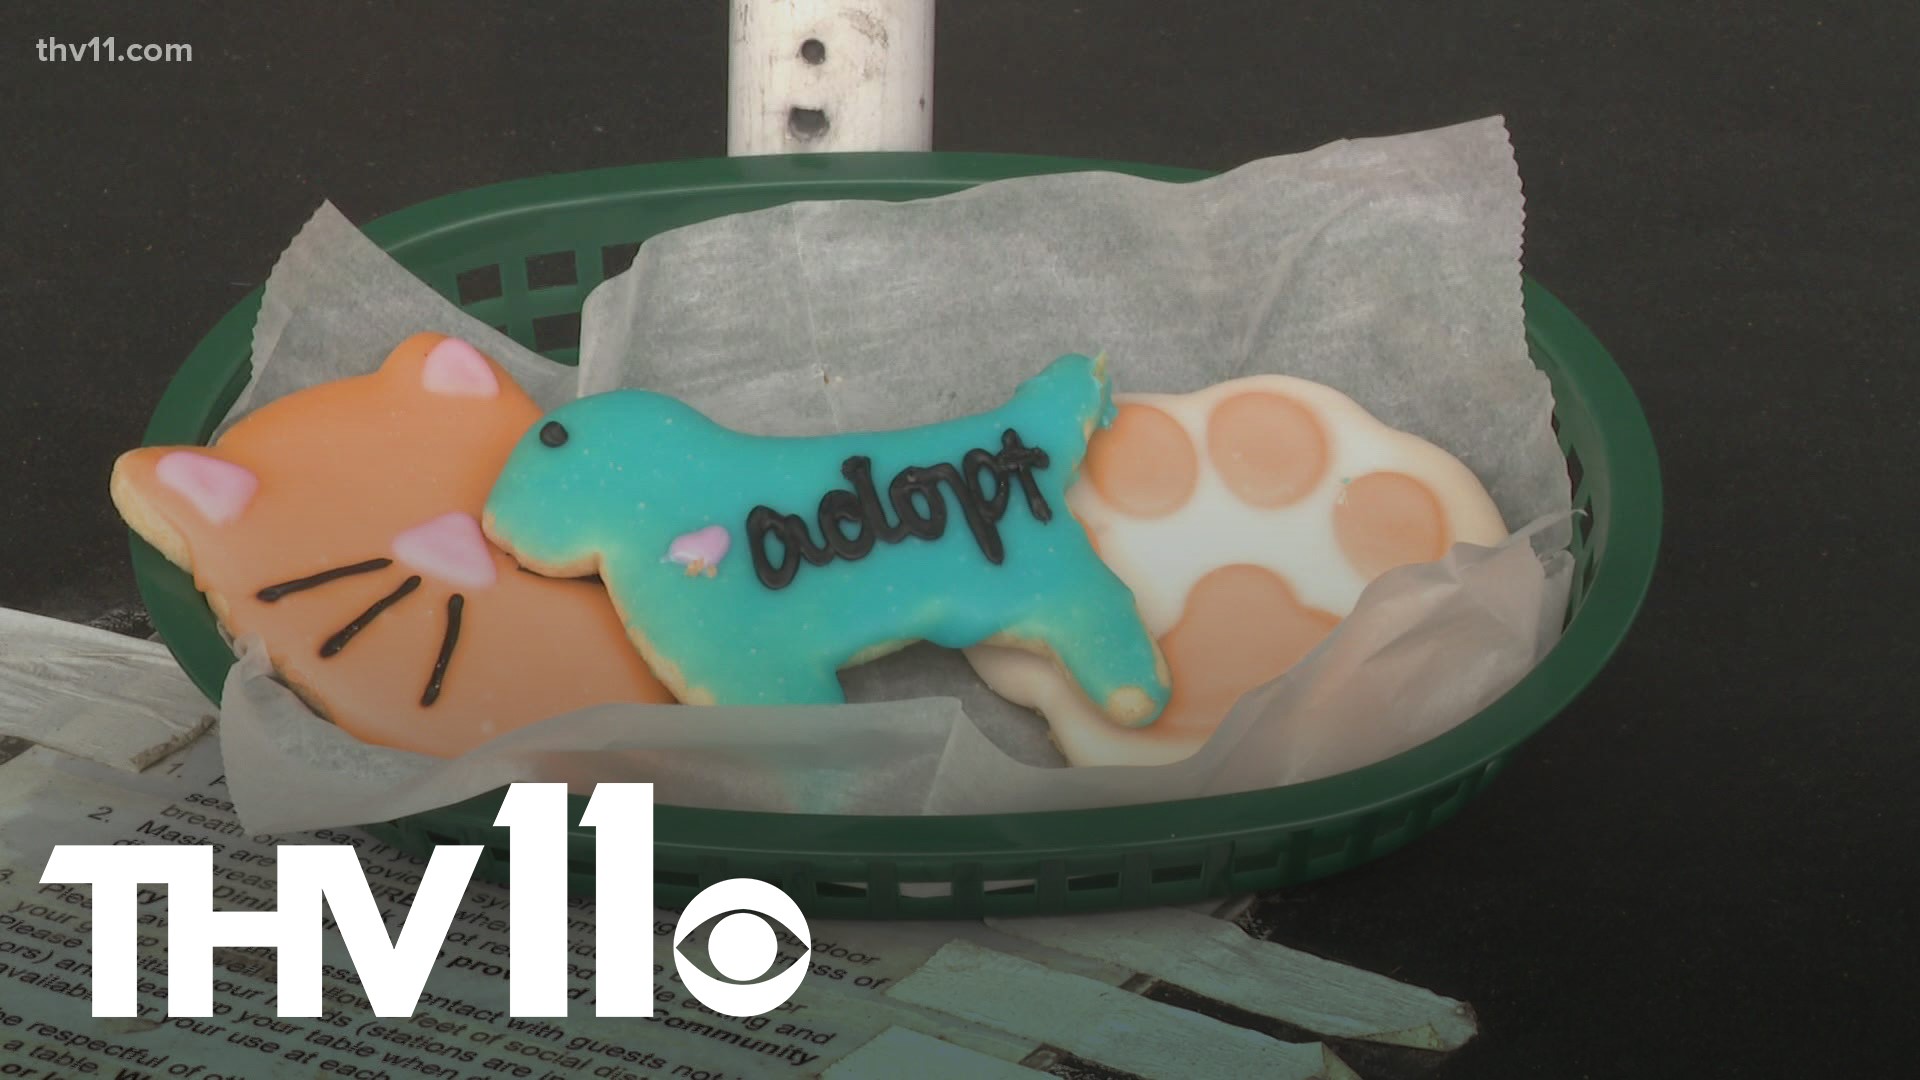 April 30th is National Adopt a Shelter Pet Day and Community Bakery in downtown Little Rock is whipping up something special.